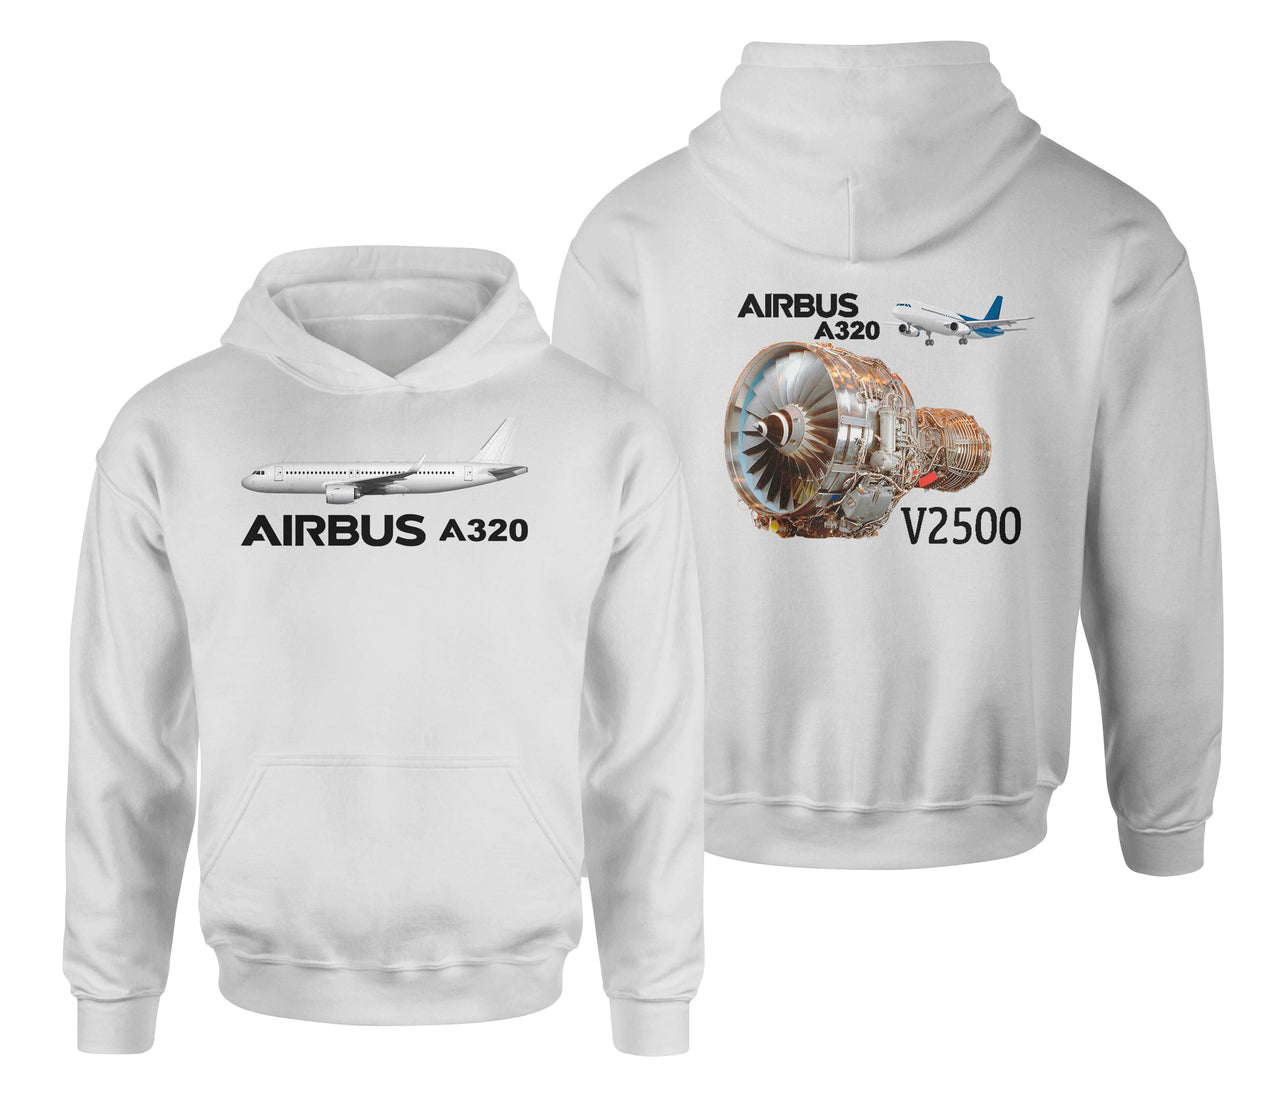 Airbus A320 & V2500 Engine Designed Double Side Hoodies